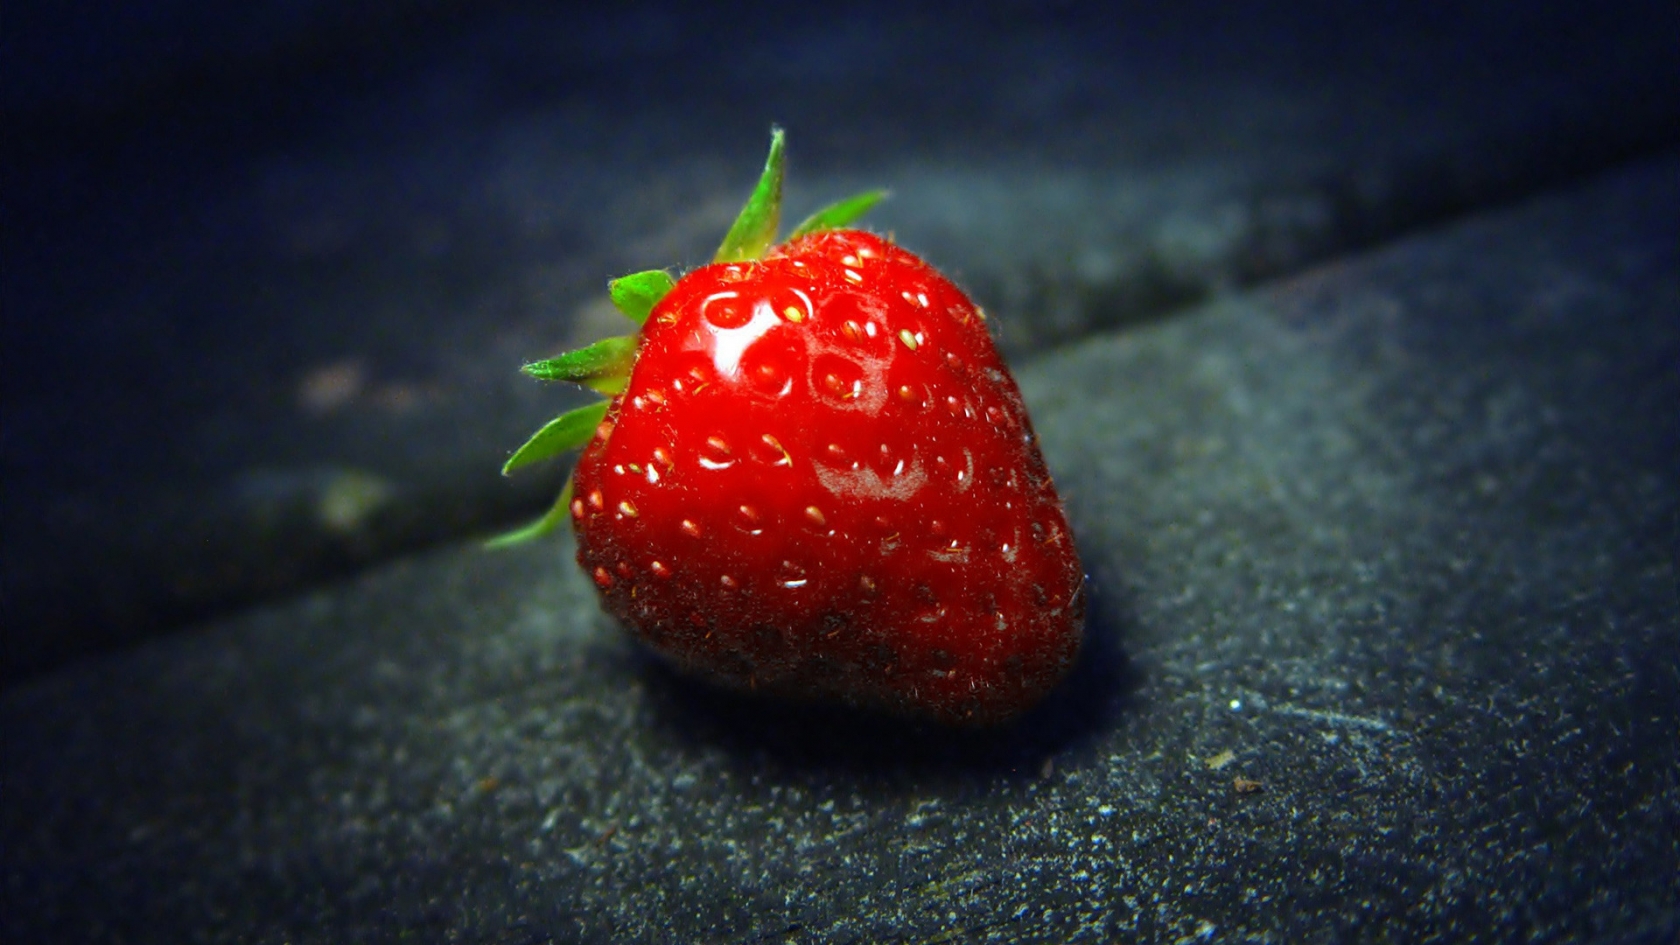 The Strawberry for 1680 x 945 HDTV resolution